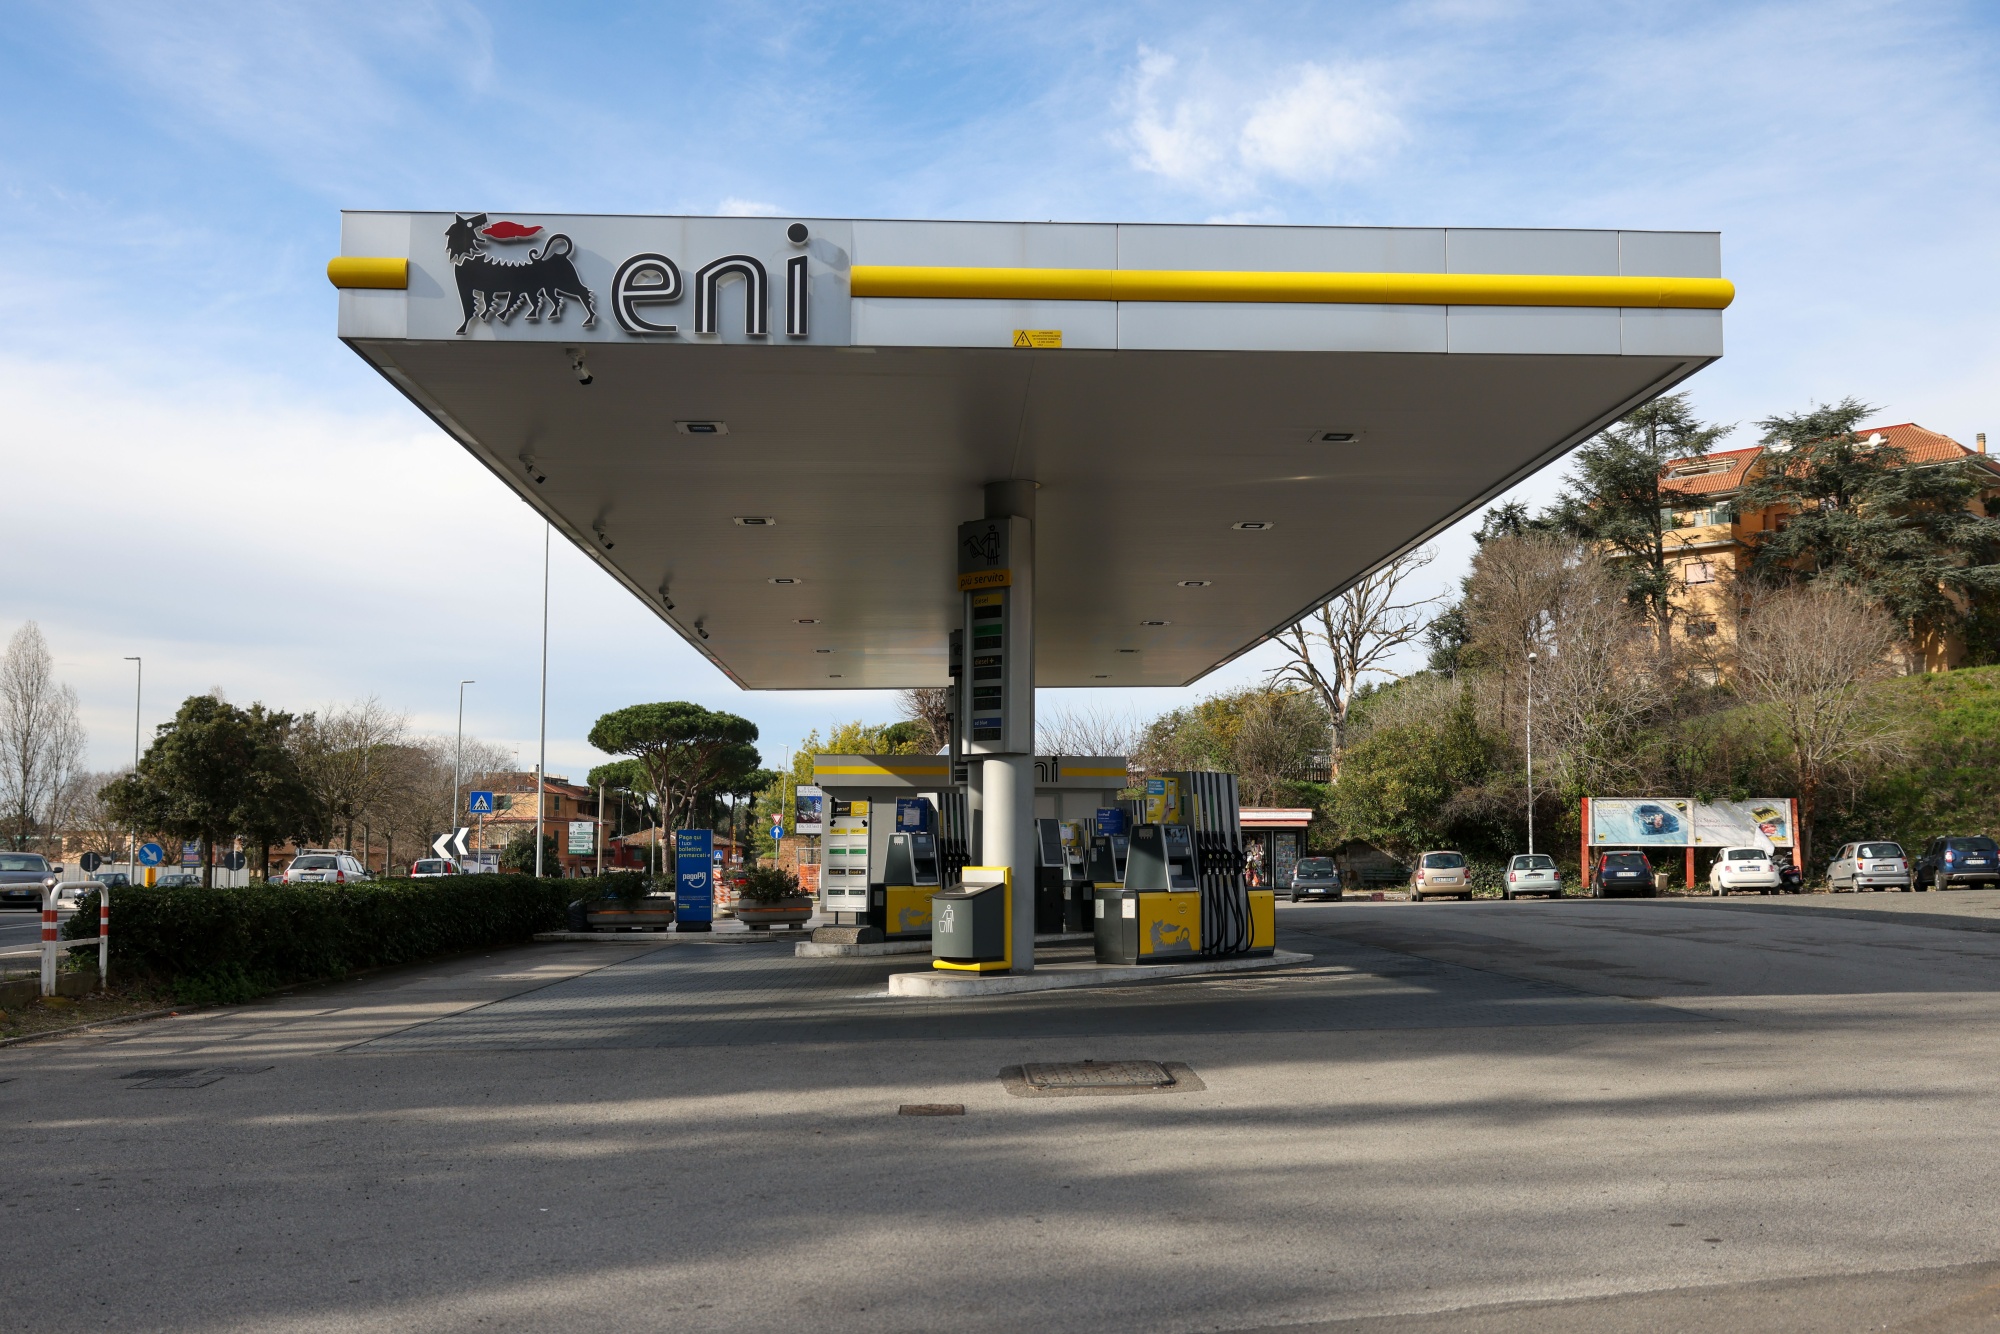 Italy Plans to Sell €2 Billion Eni Stake to Reduce Debt - Bloomberg